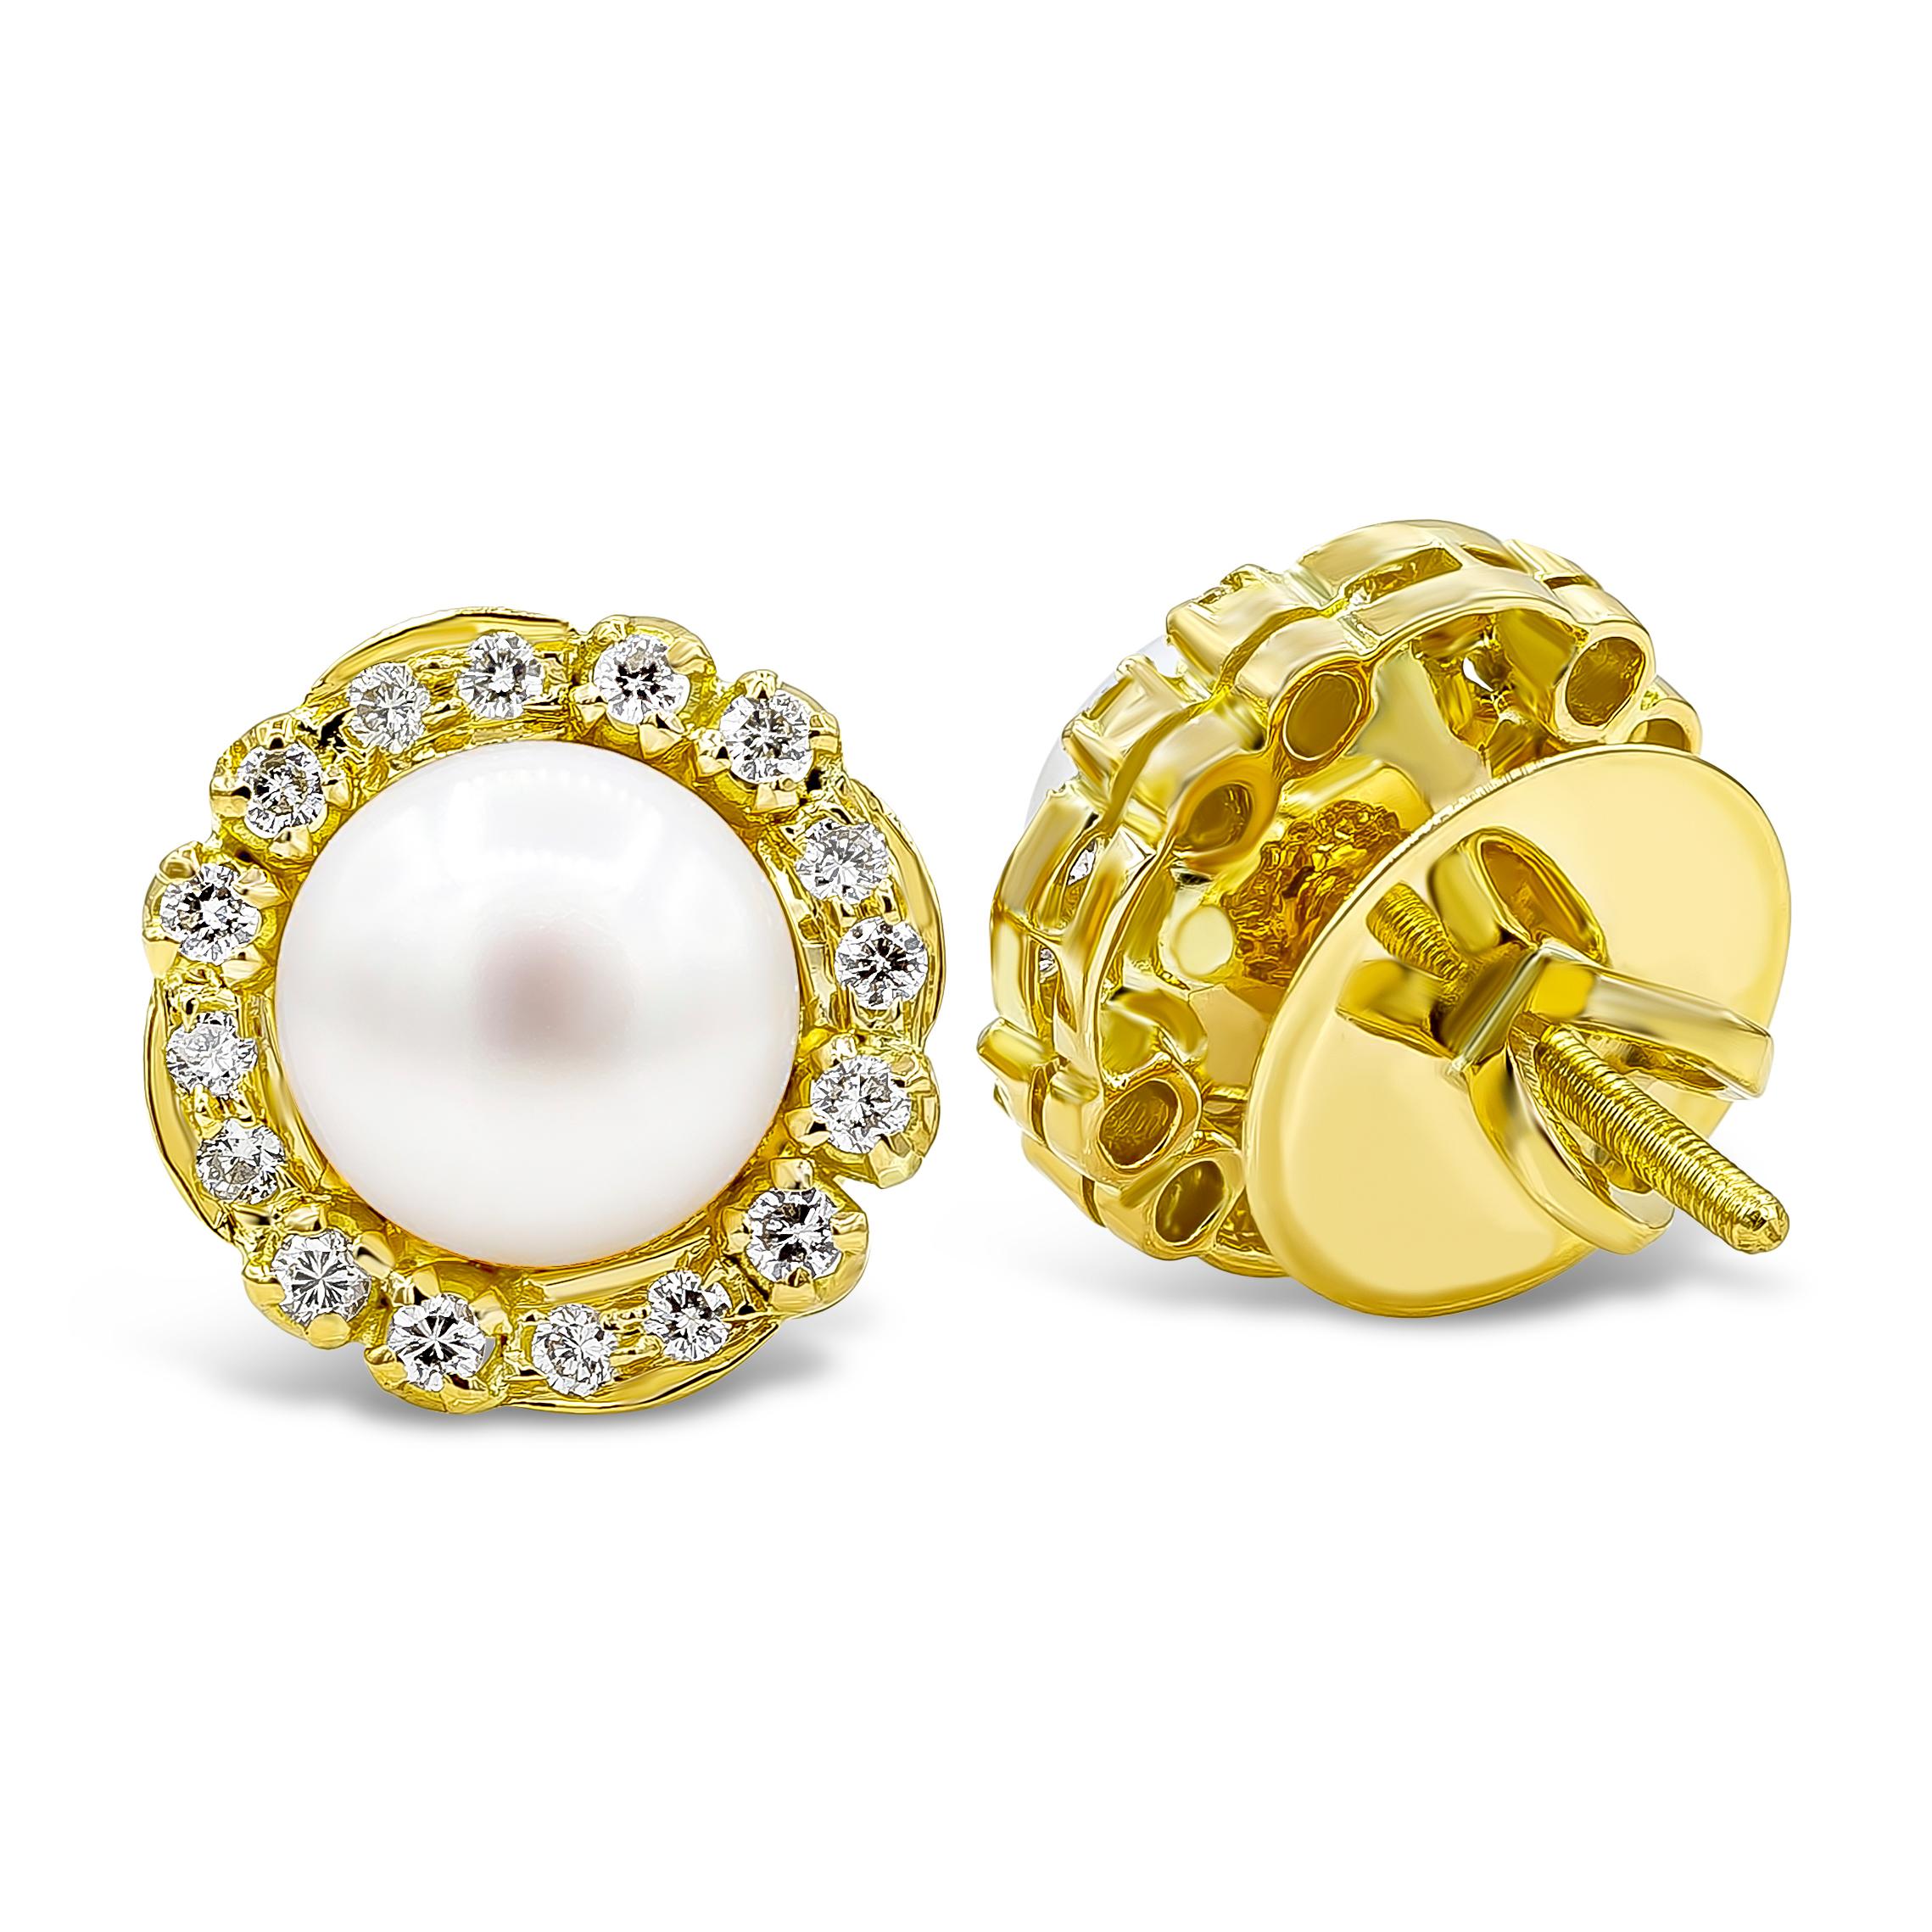 A lovely pair of earrings showcasing 13.25mm button pearls accented by brilliant round diamonds in a halo design weighing 0.38 carats total, G-H Color and SI in Clarity. Screw back post and made in 18K Yellow Gold.
